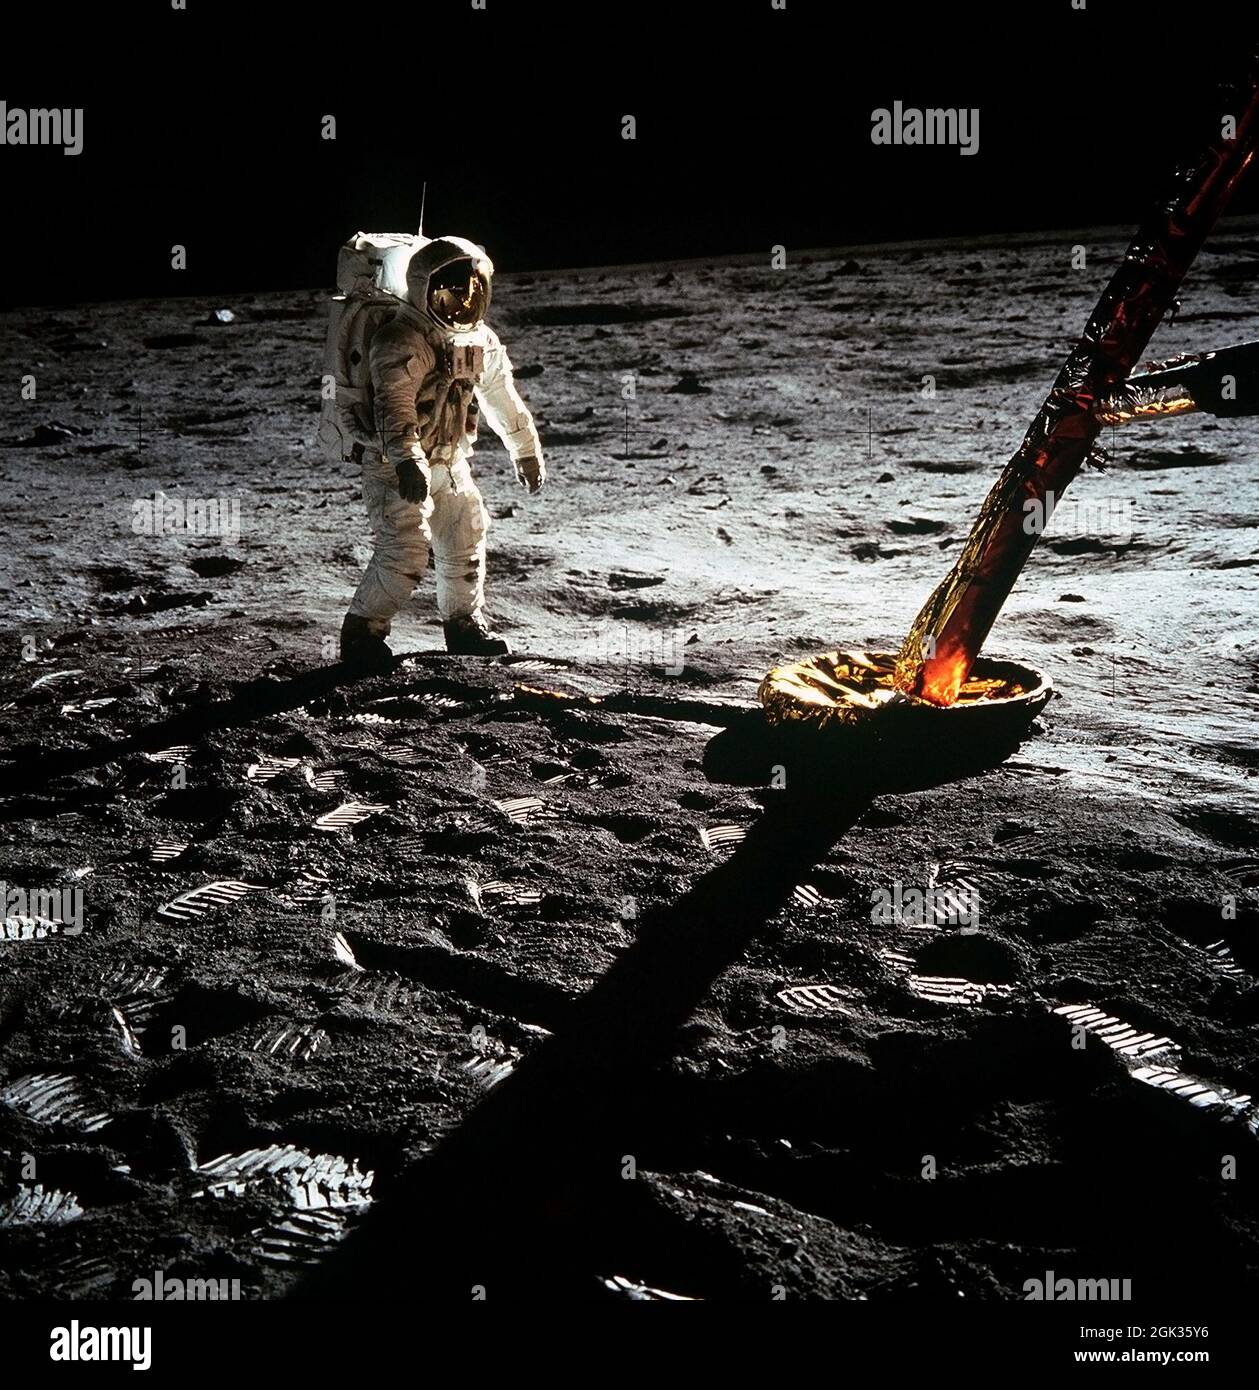 (20 July 1969) --- Astronaut Edwin E. Aldrin Jr., lunar module pilot, walks on the surface of the moon near a leg of the Lunar Module during the Apollo 11 extravehicular activity (EVA). Astronaut Neil A. Armstrong, Apollo 11 commander, took this photograph with a 70mm lunar surface camera. The astronauts' bootprints are clearly visible in the foreground. Stock Photo